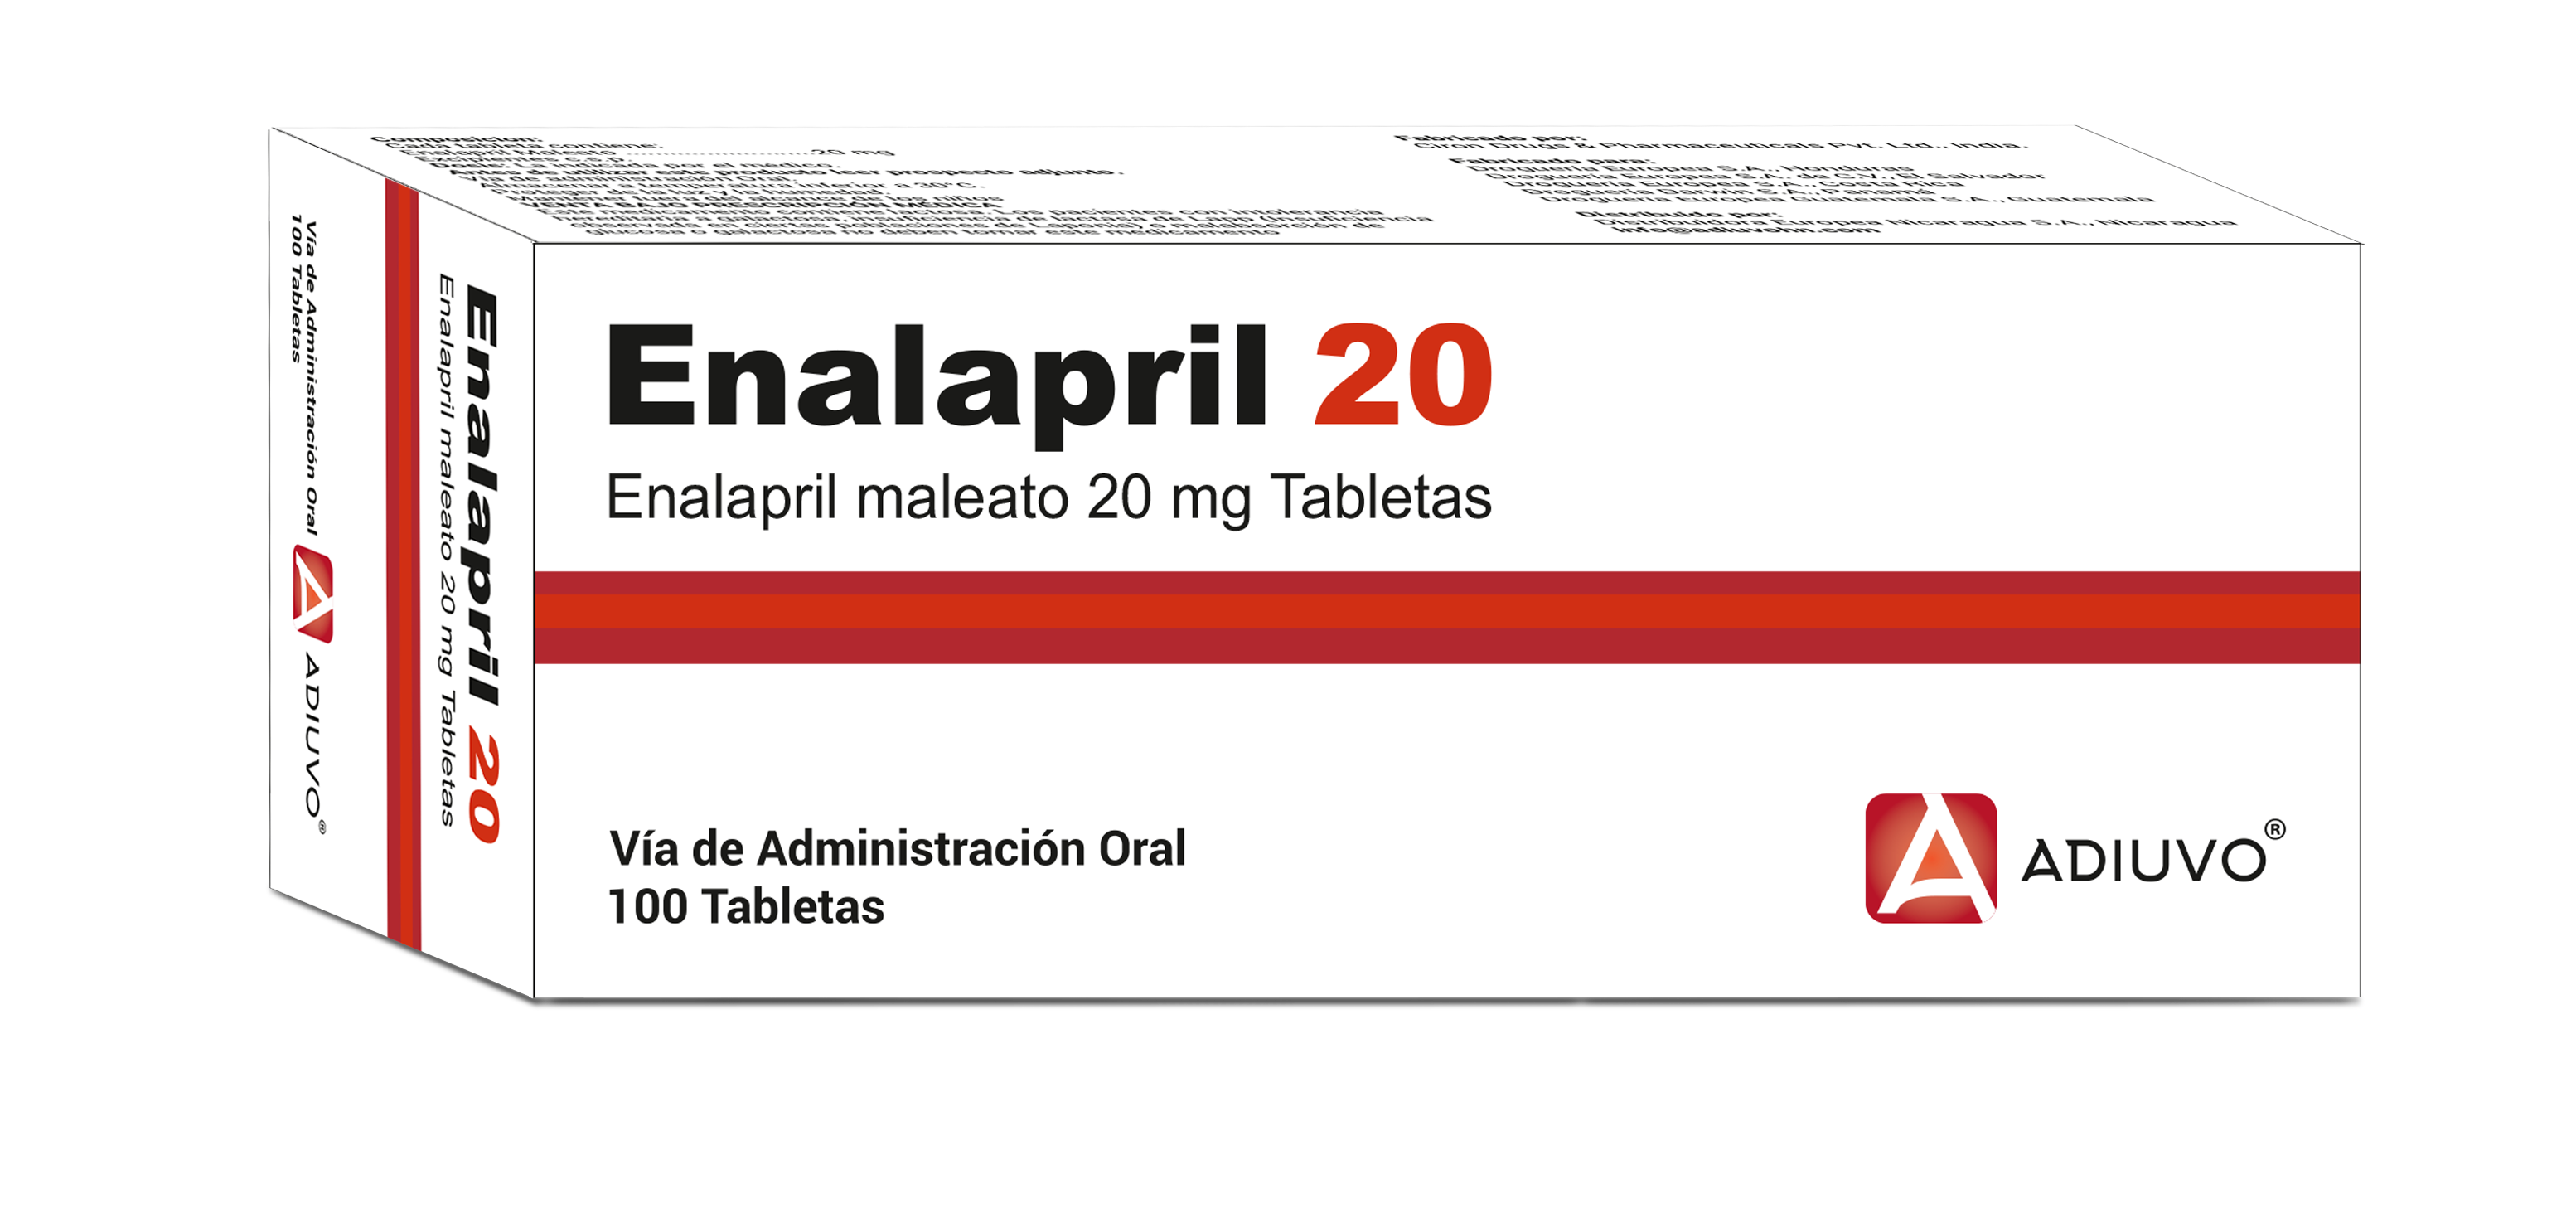 Enalapril is an ACE inhibitor used to treat hypertension and heart failure